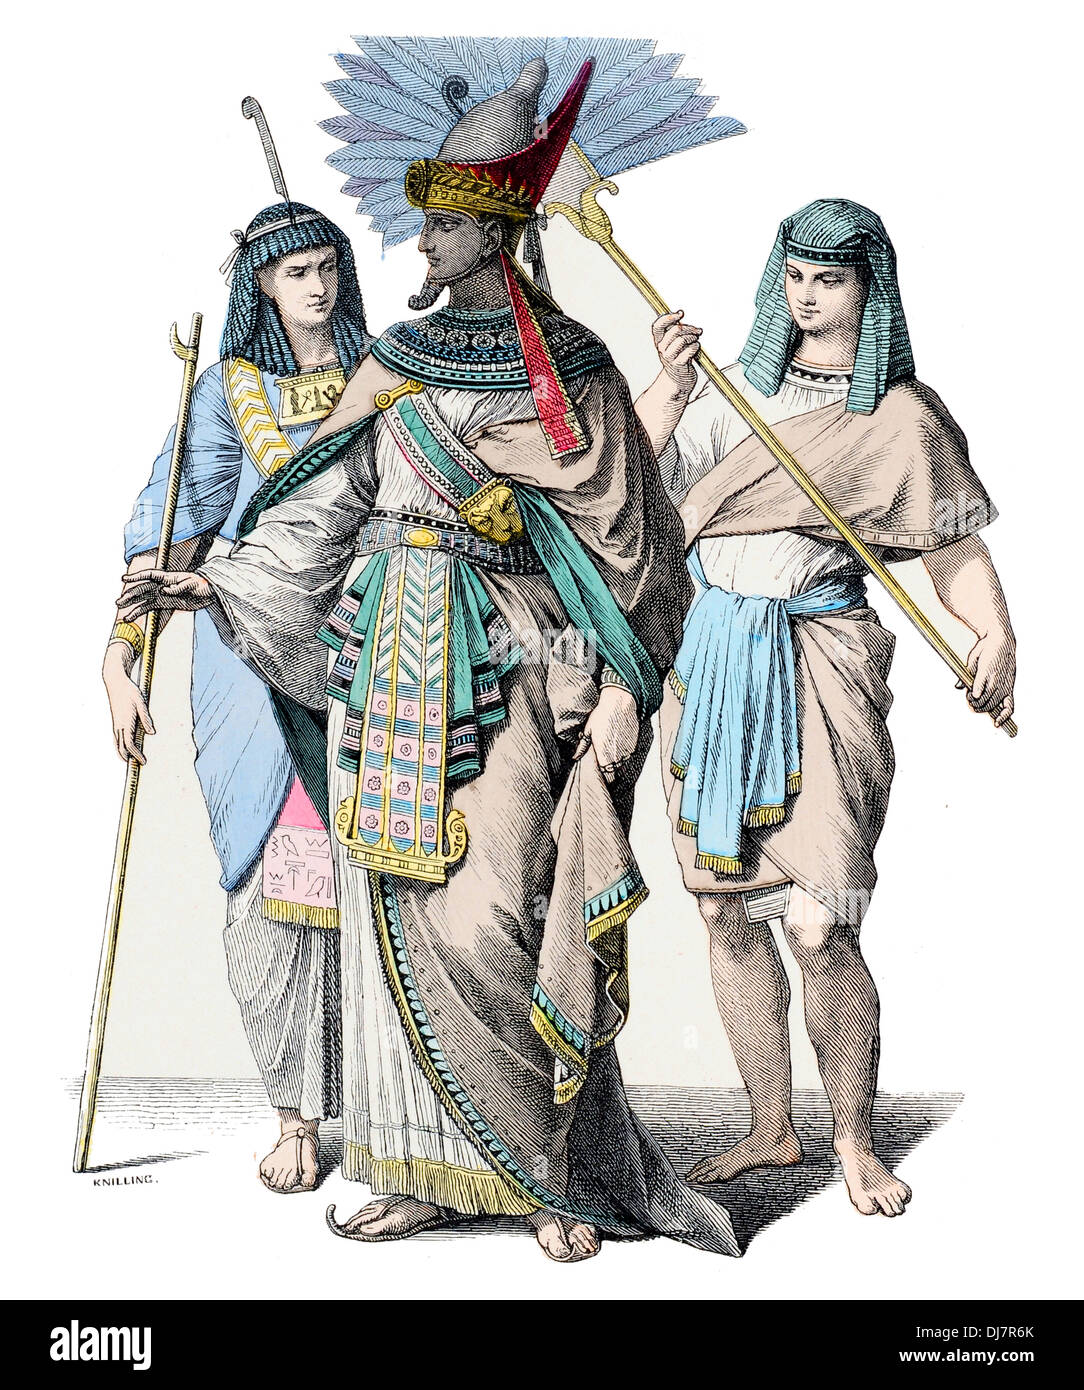 Pre Christian BC Ancient Egypt Court Official and Fan Bearer Stock Photo